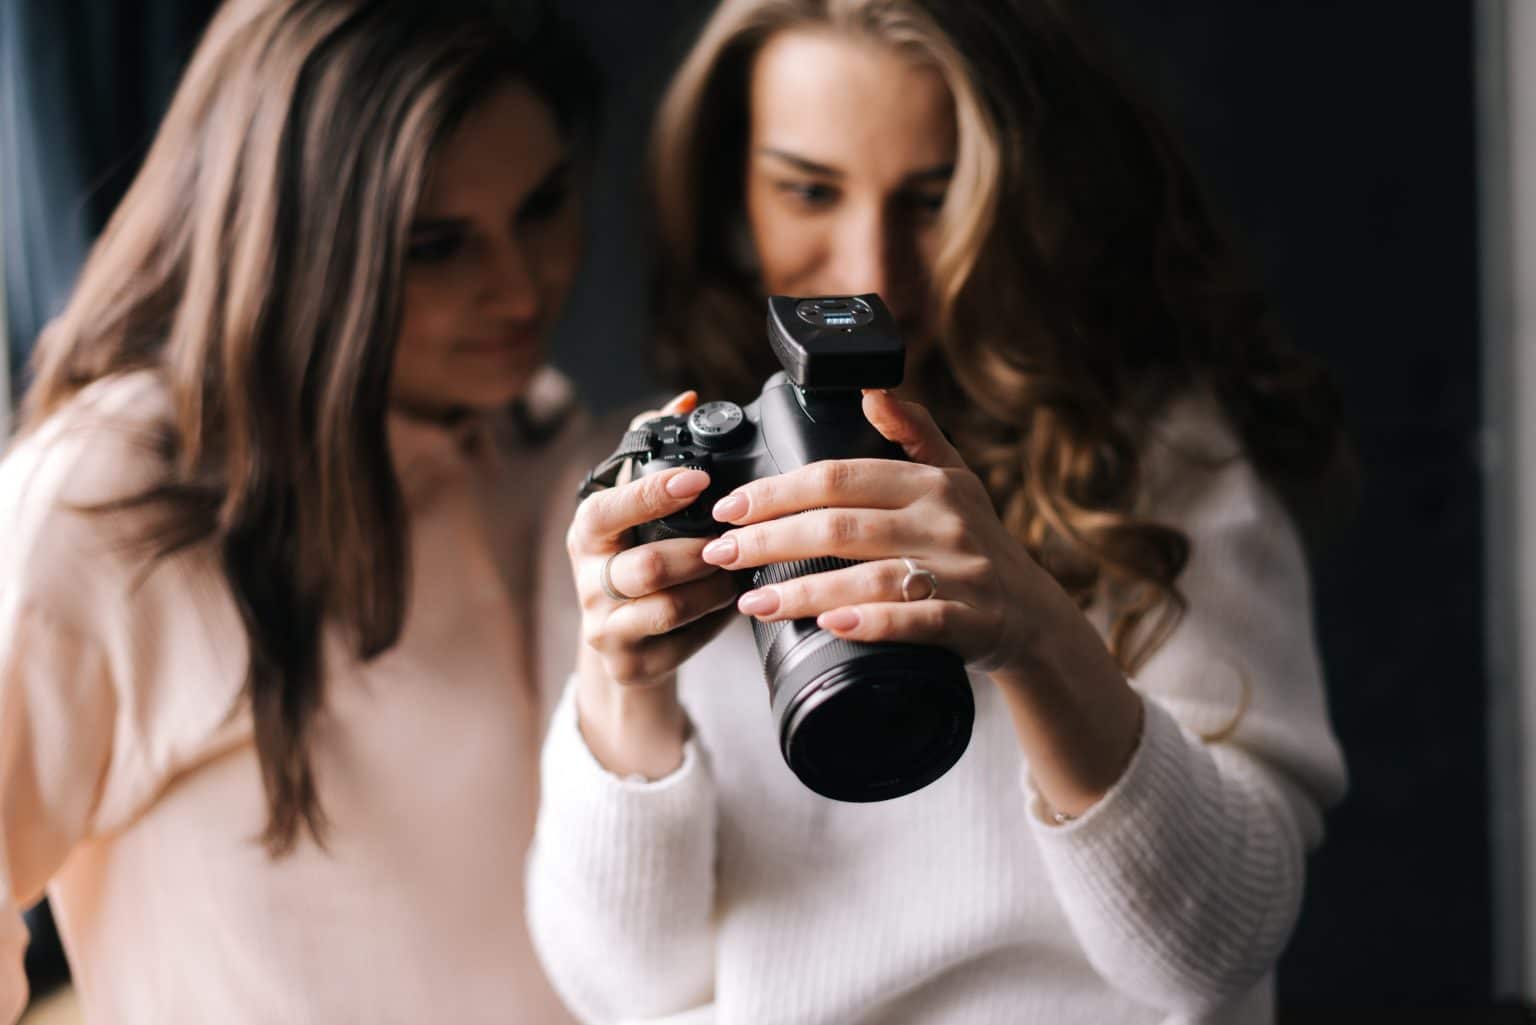 Two women showing photos on a camera